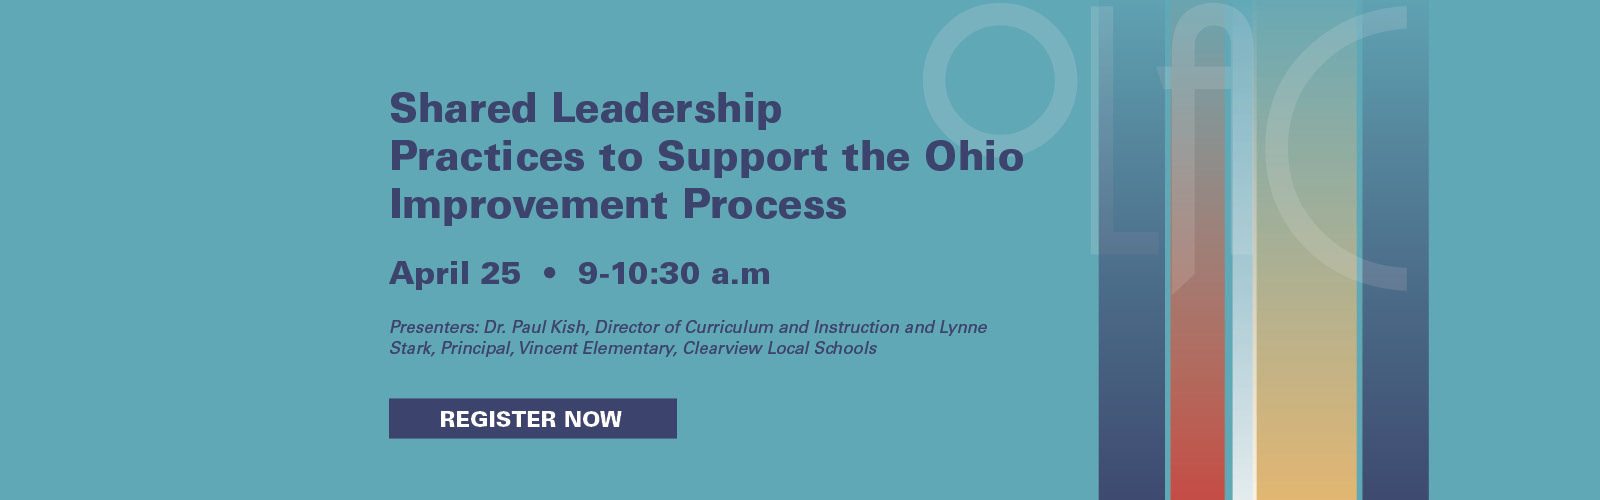 April 25, 9-10:30 - Shared Leadership Practices to Support the Ohio Improvement Process